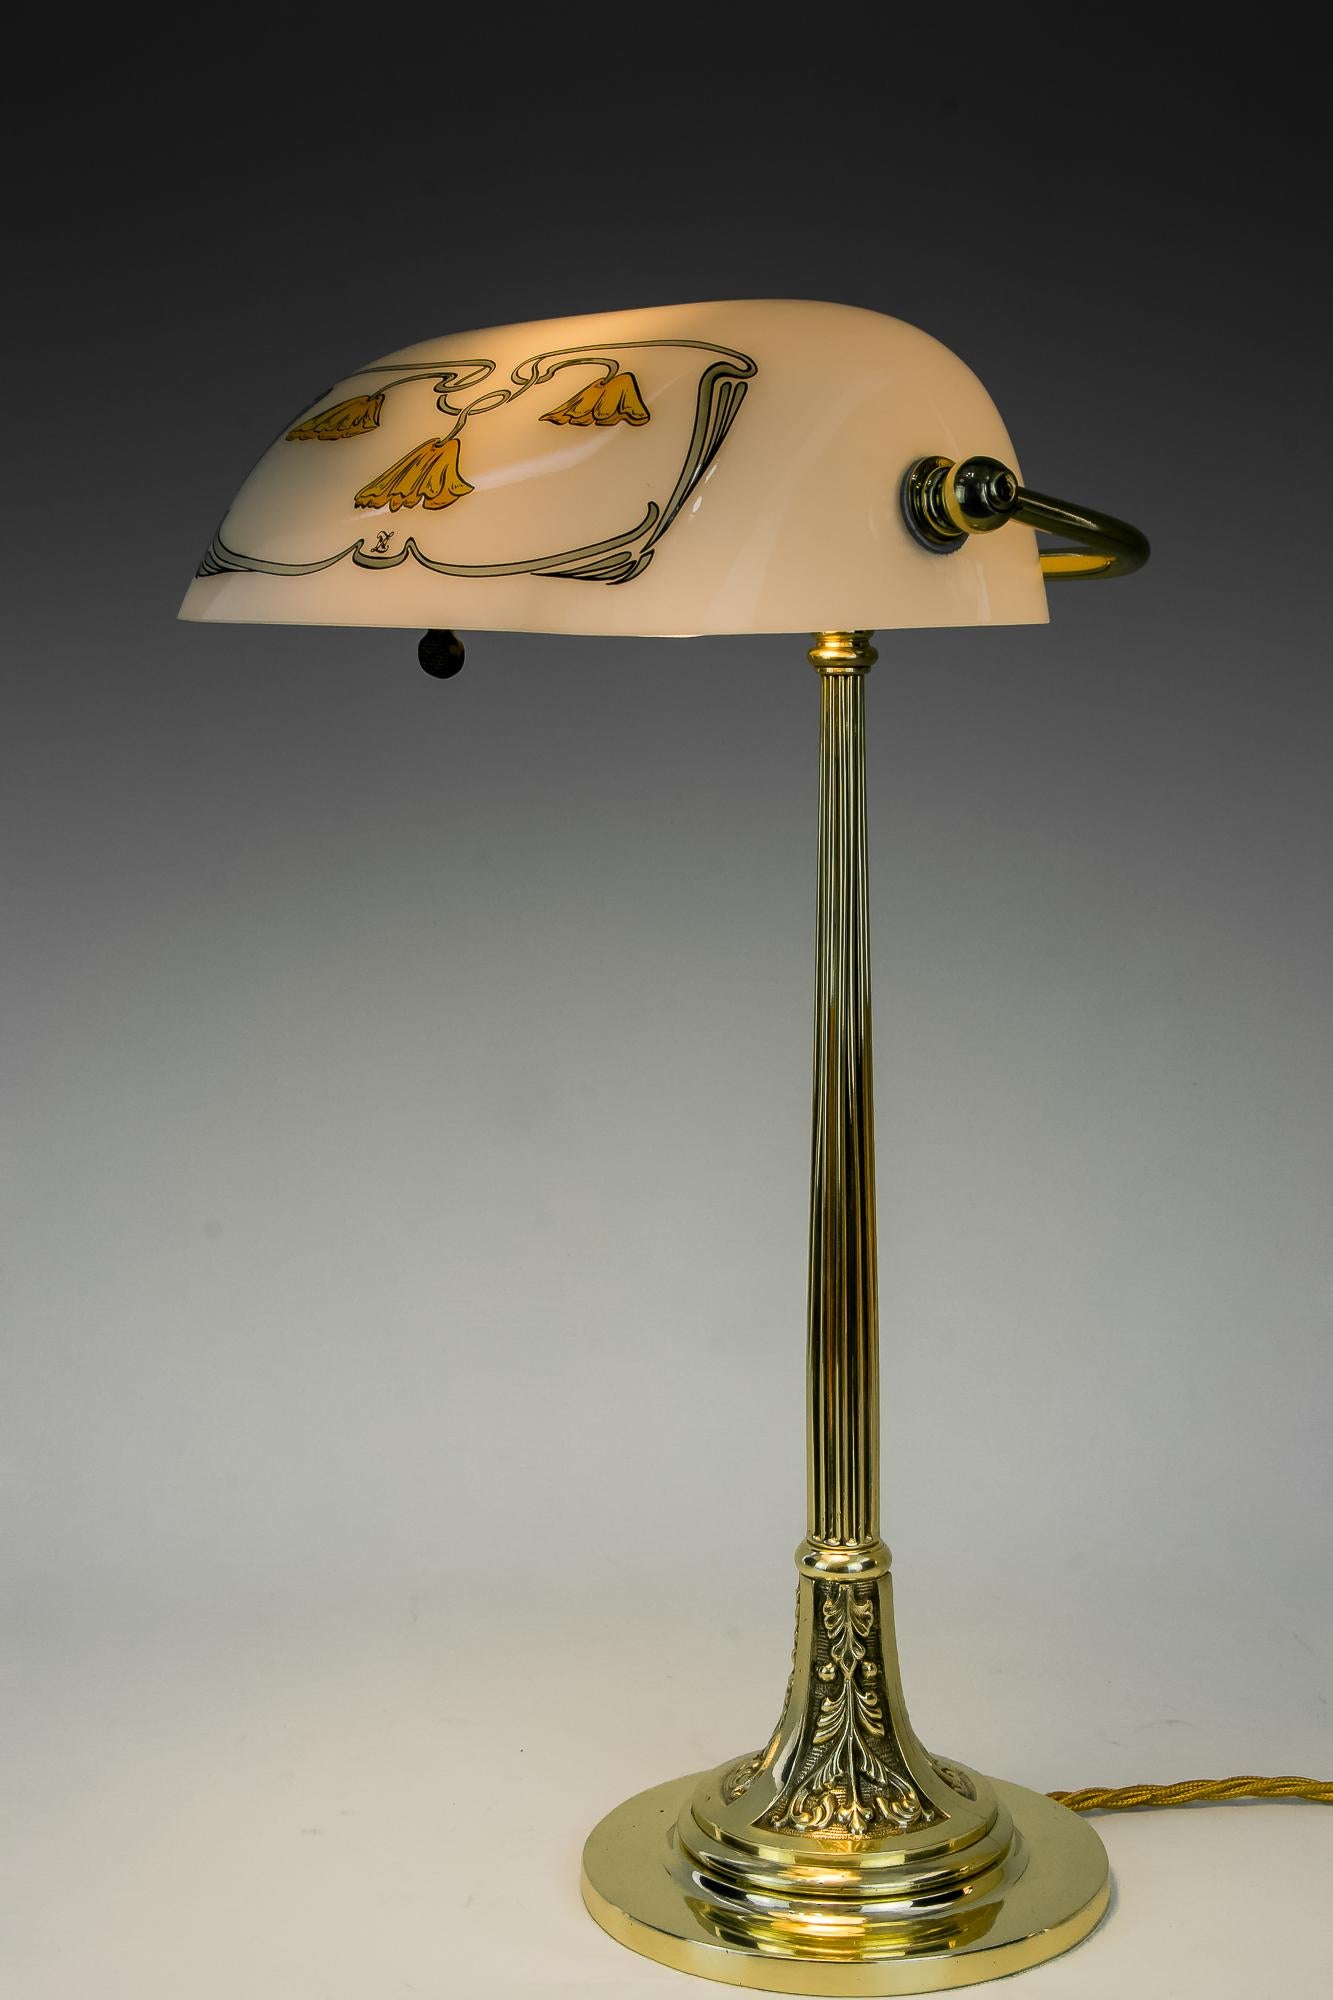 Jugendstil table lamp with new glass shade, Vienna, circa 1908.
Brass polished and stove enameled.